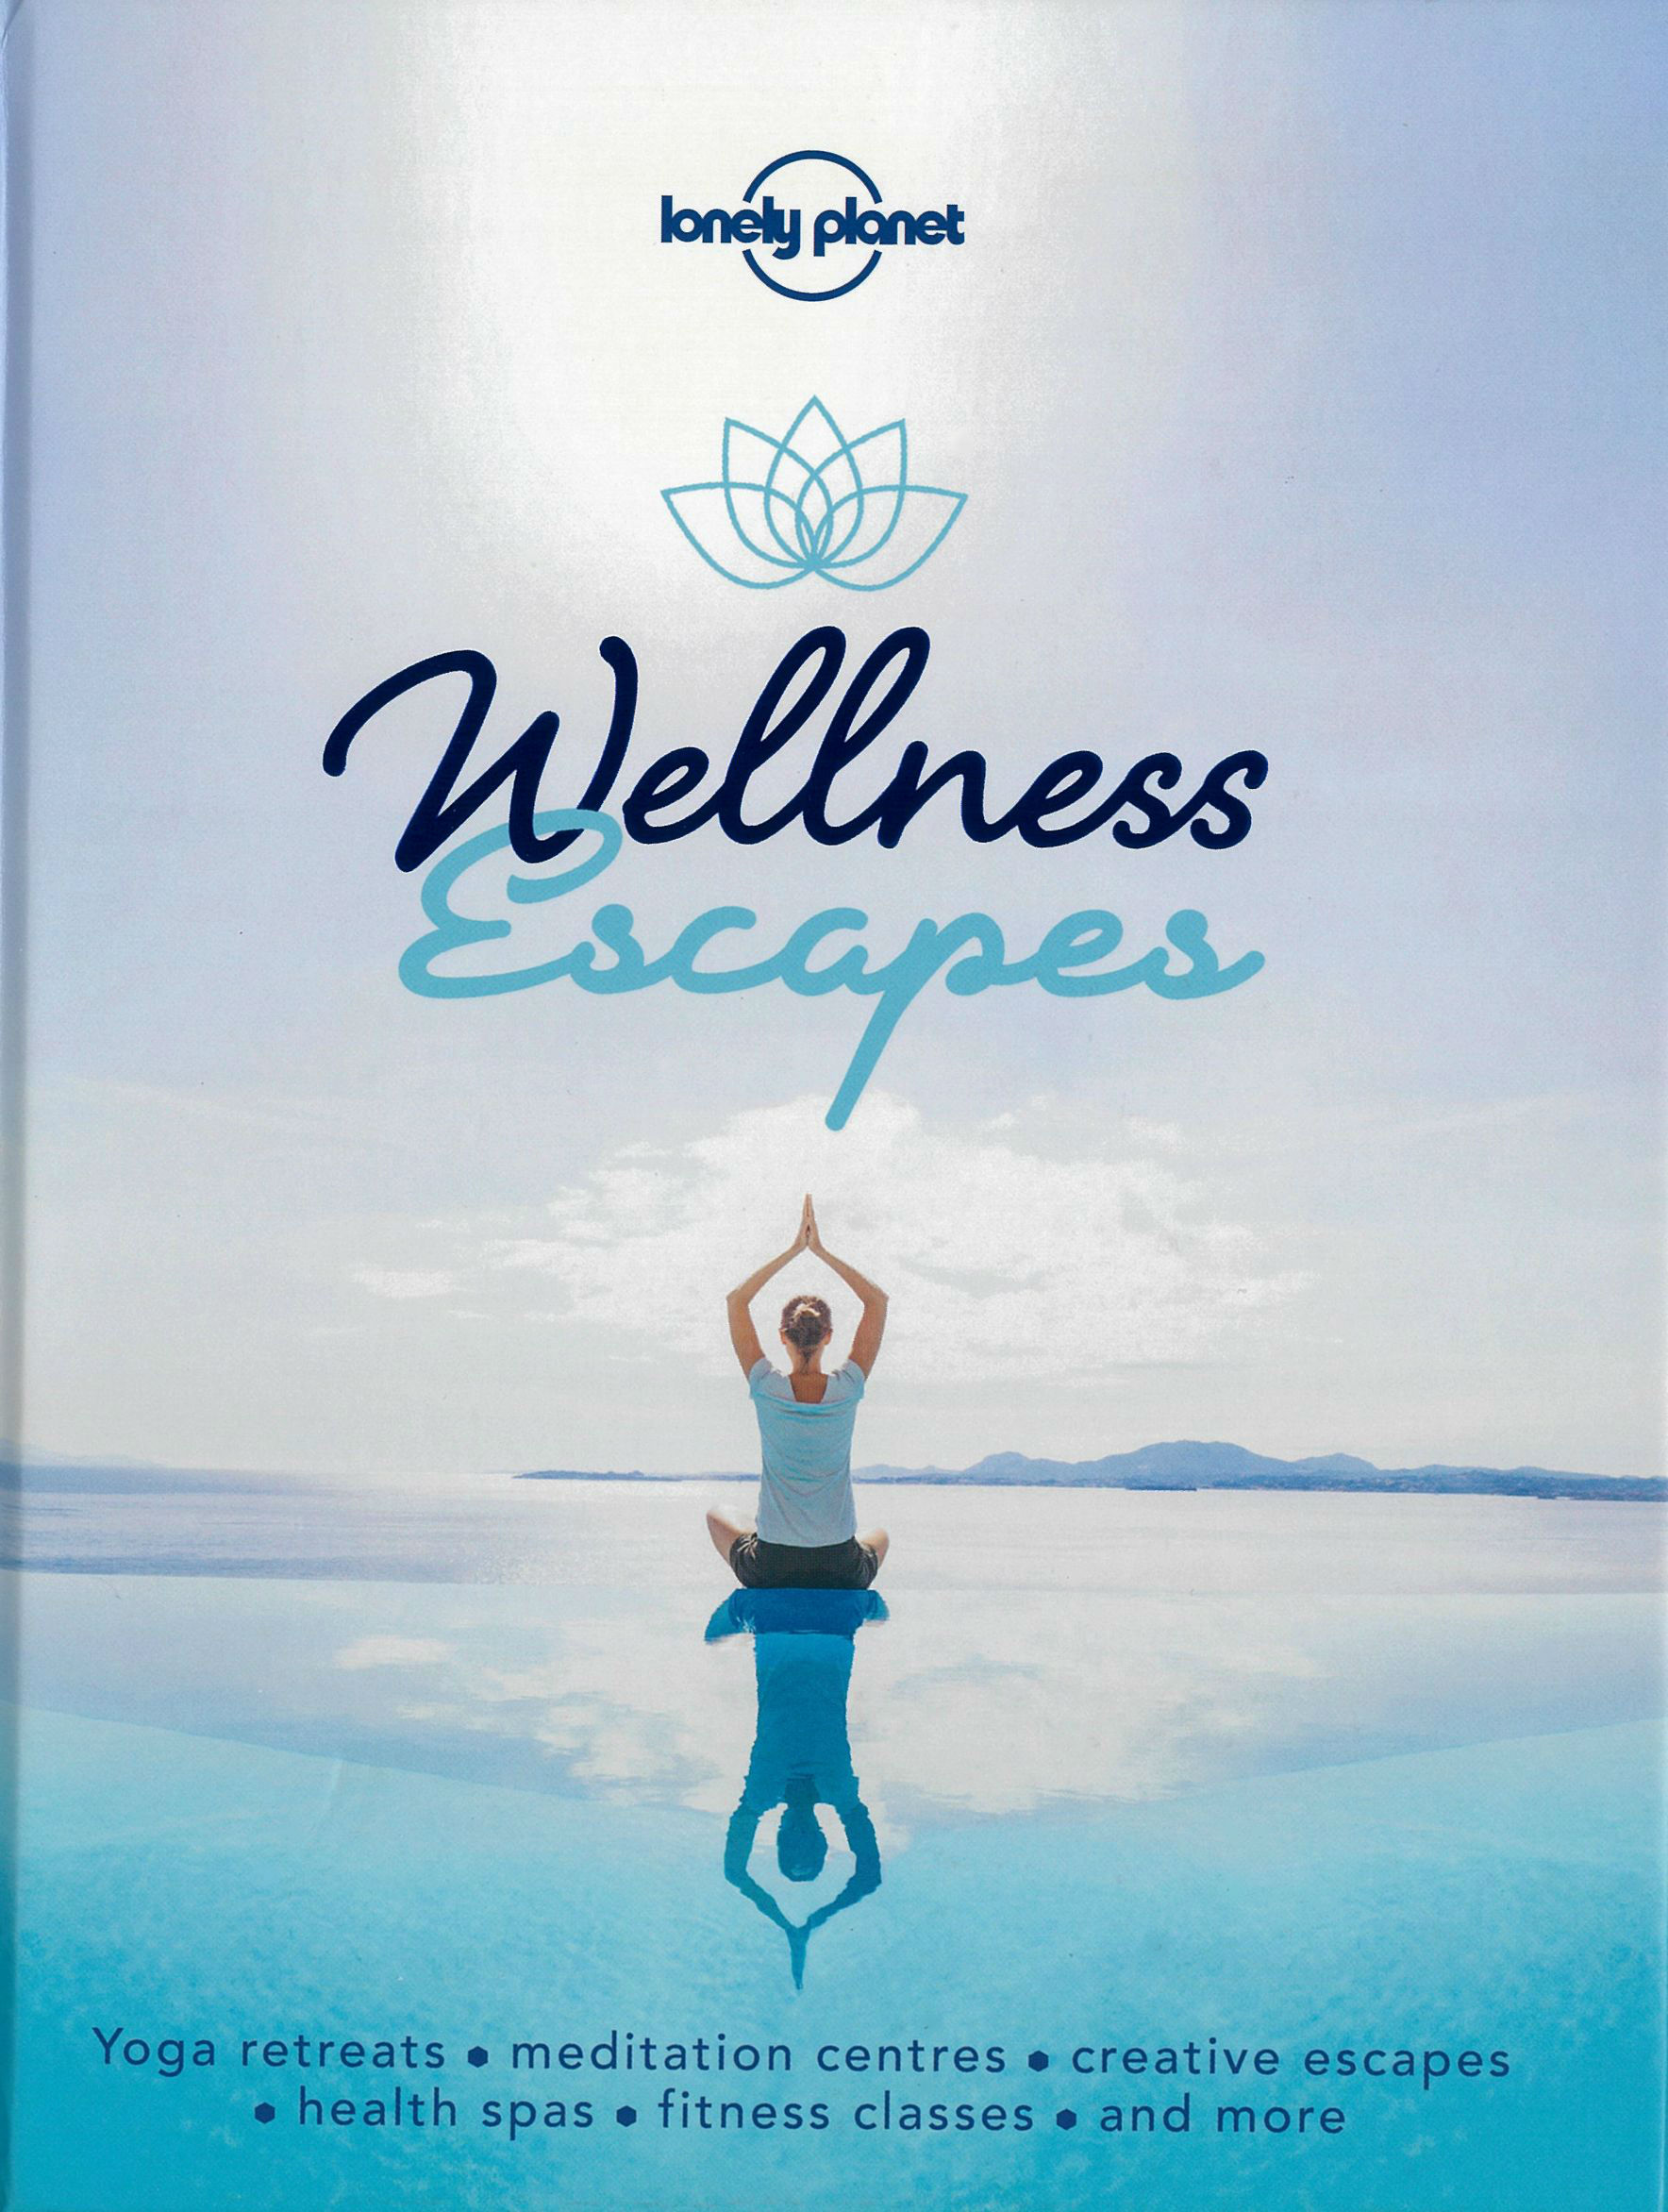 Bettei Otozure was featured in Lonely Planet Wellness Escapes